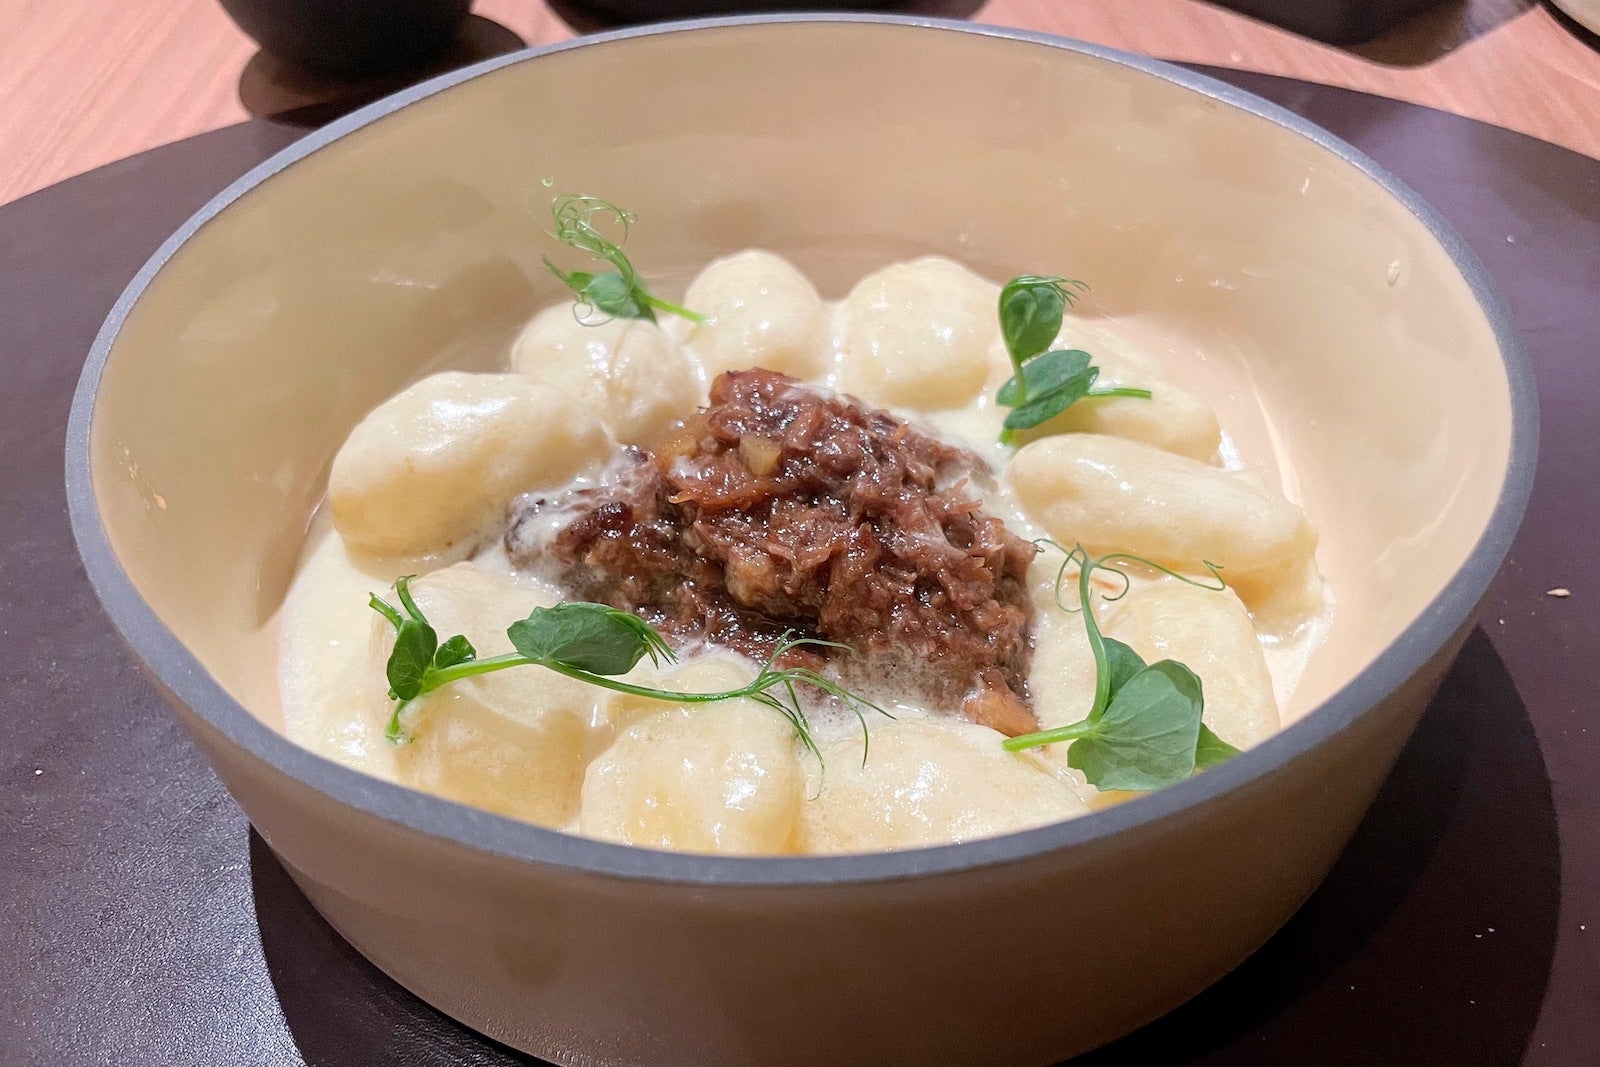 gnocci pasta in bowl with meat